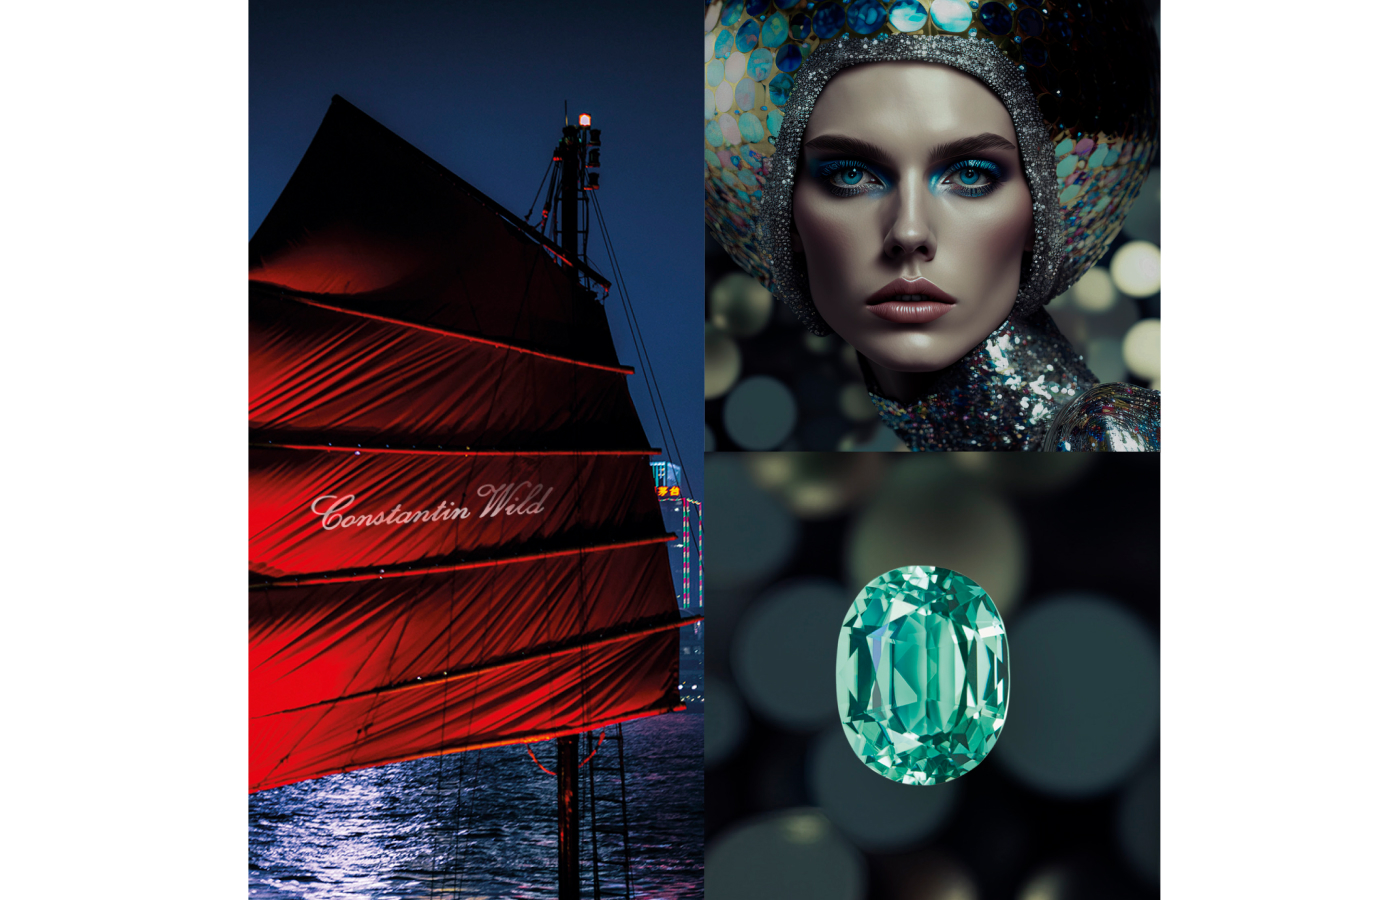 Constantin Wild showcases a special blend of AI and coloured gemstones in its latest brand imagery